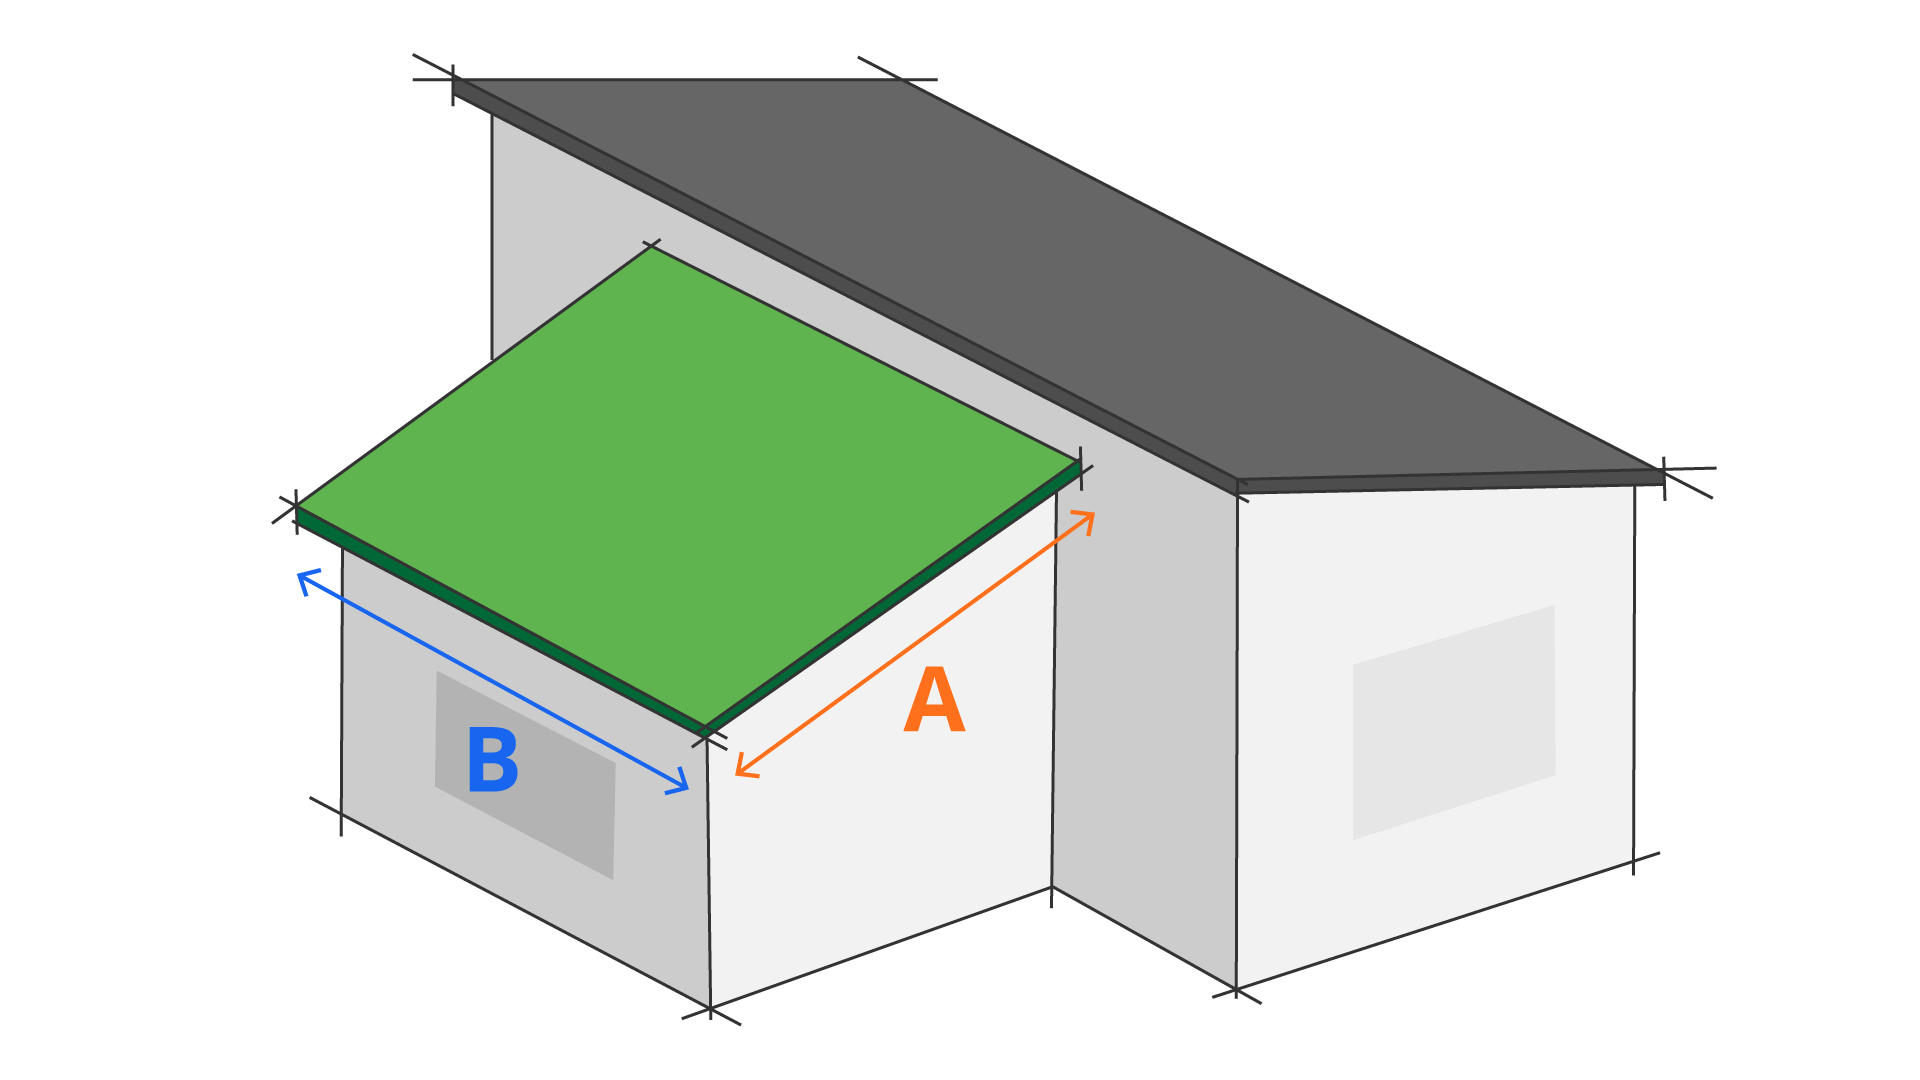 Lean-To Roof Diagram with coordinates